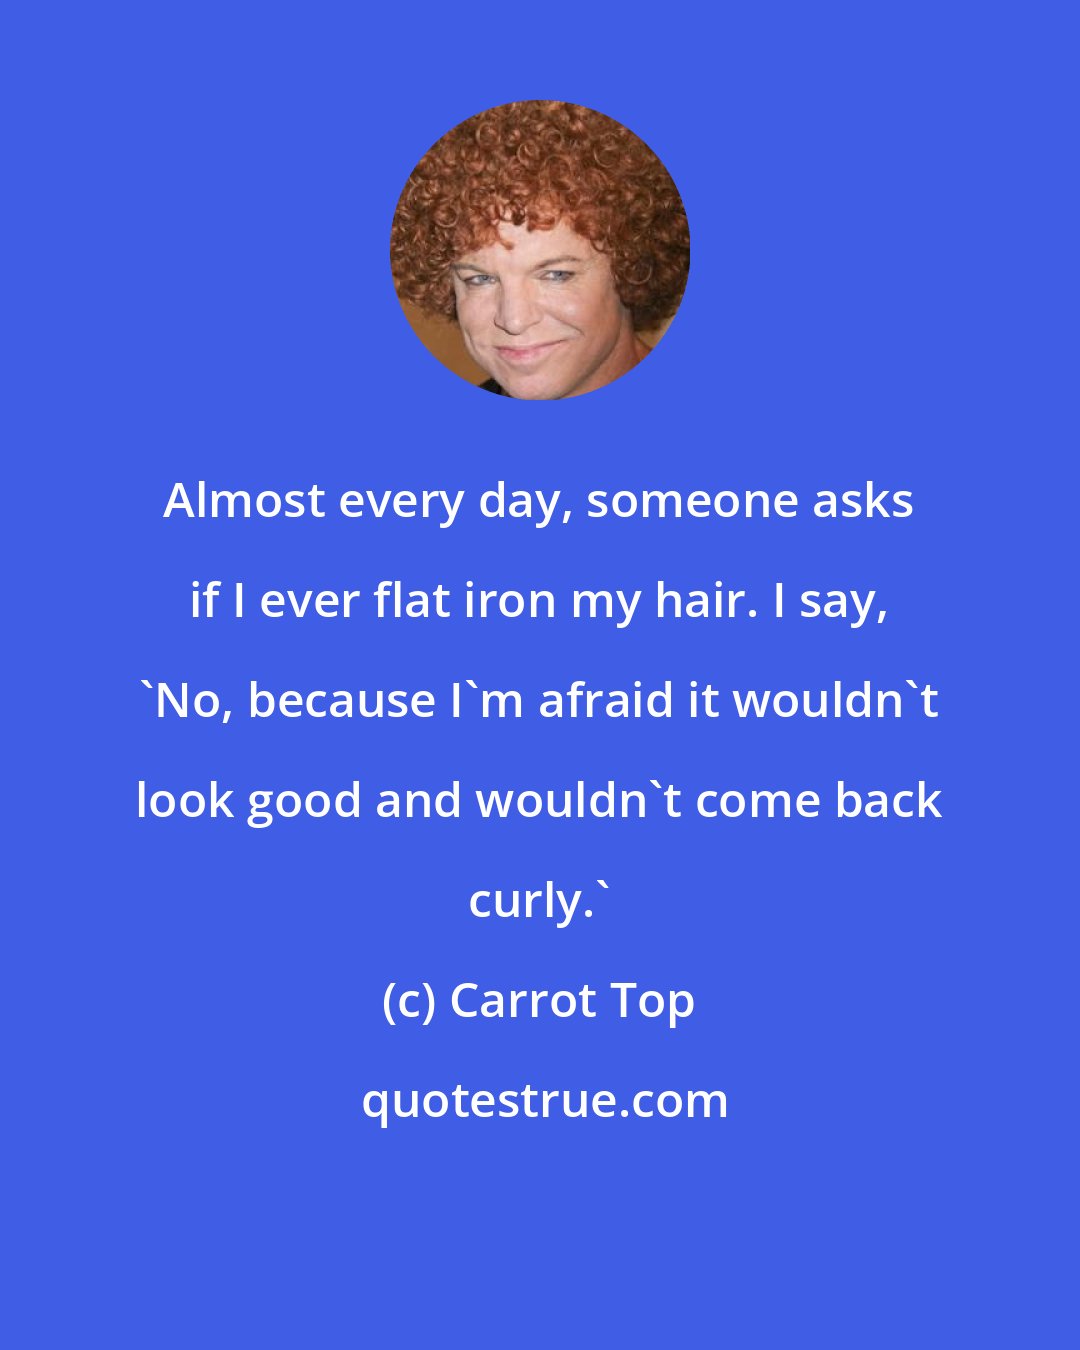 Carrot Top: Almost every day, someone asks if I ever flat iron my hair. I say, 'No, because I'm afraid it wouldn't look good and wouldn't come back curly.'